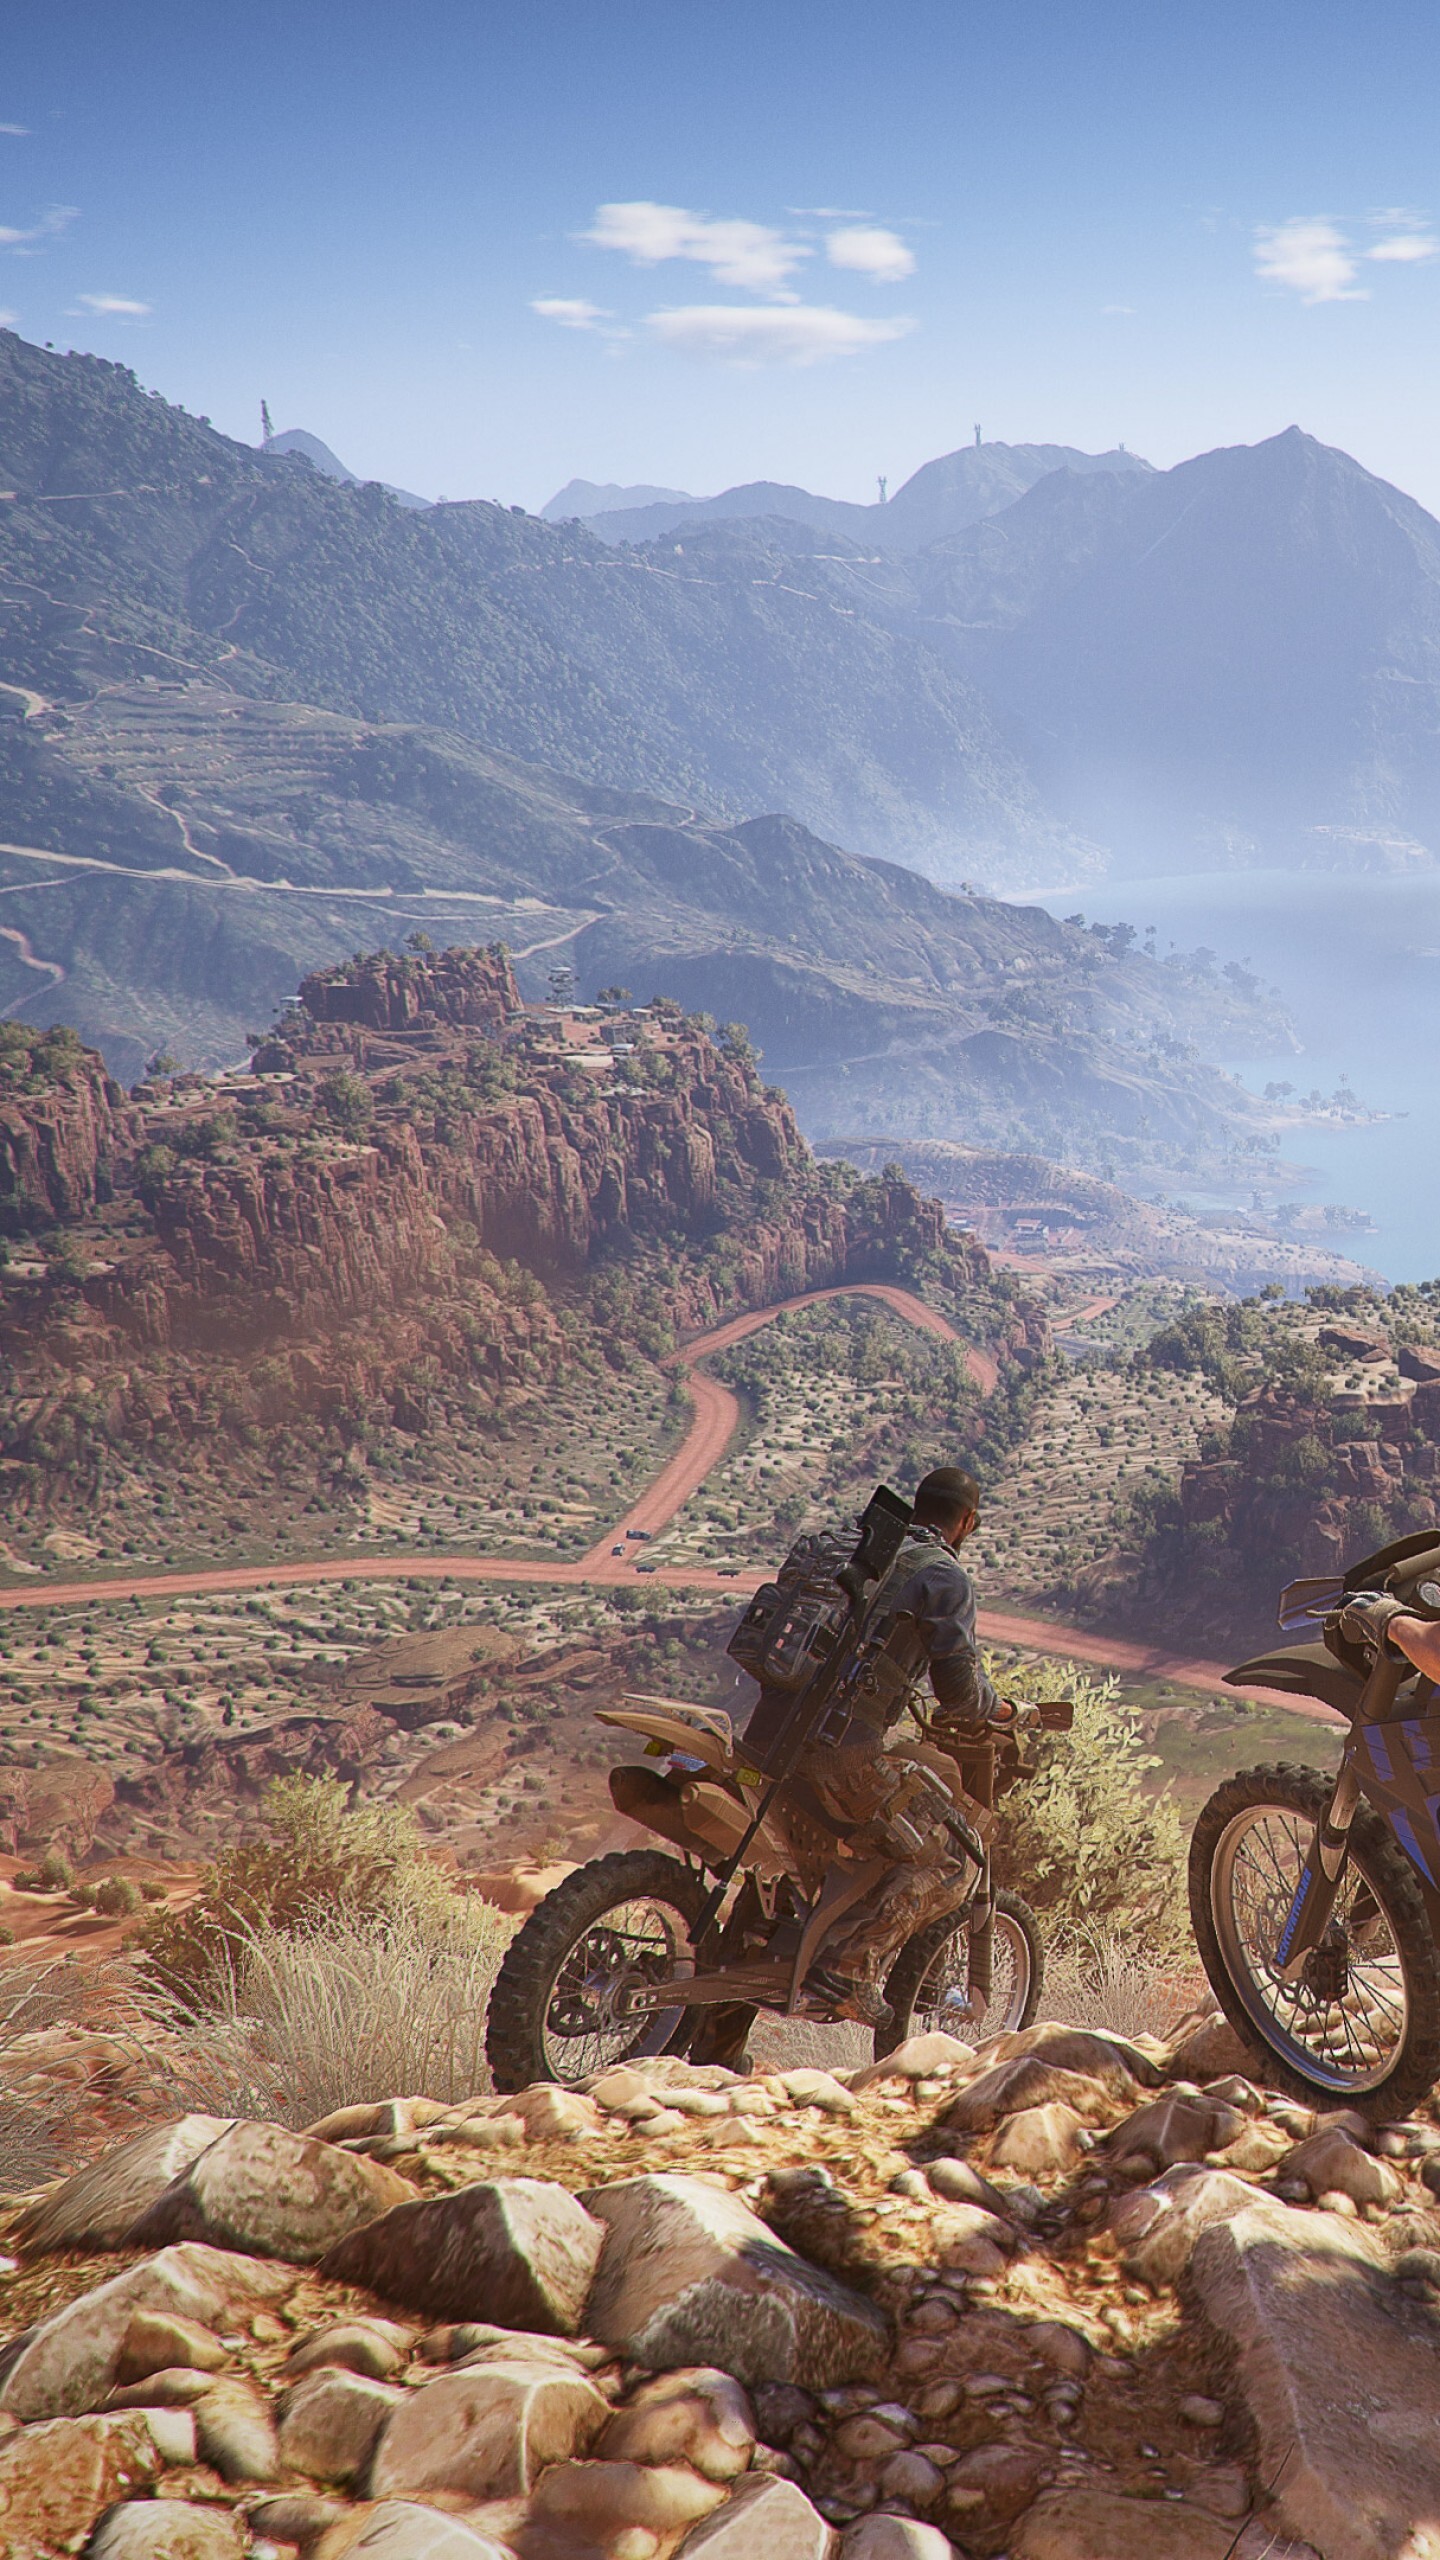 Ghost Recon: Wildlands: Bolivian landscape in the first open-world game in a popular tactical shooter series by Ubisoft. 1440x2560 HD Wallpaper.